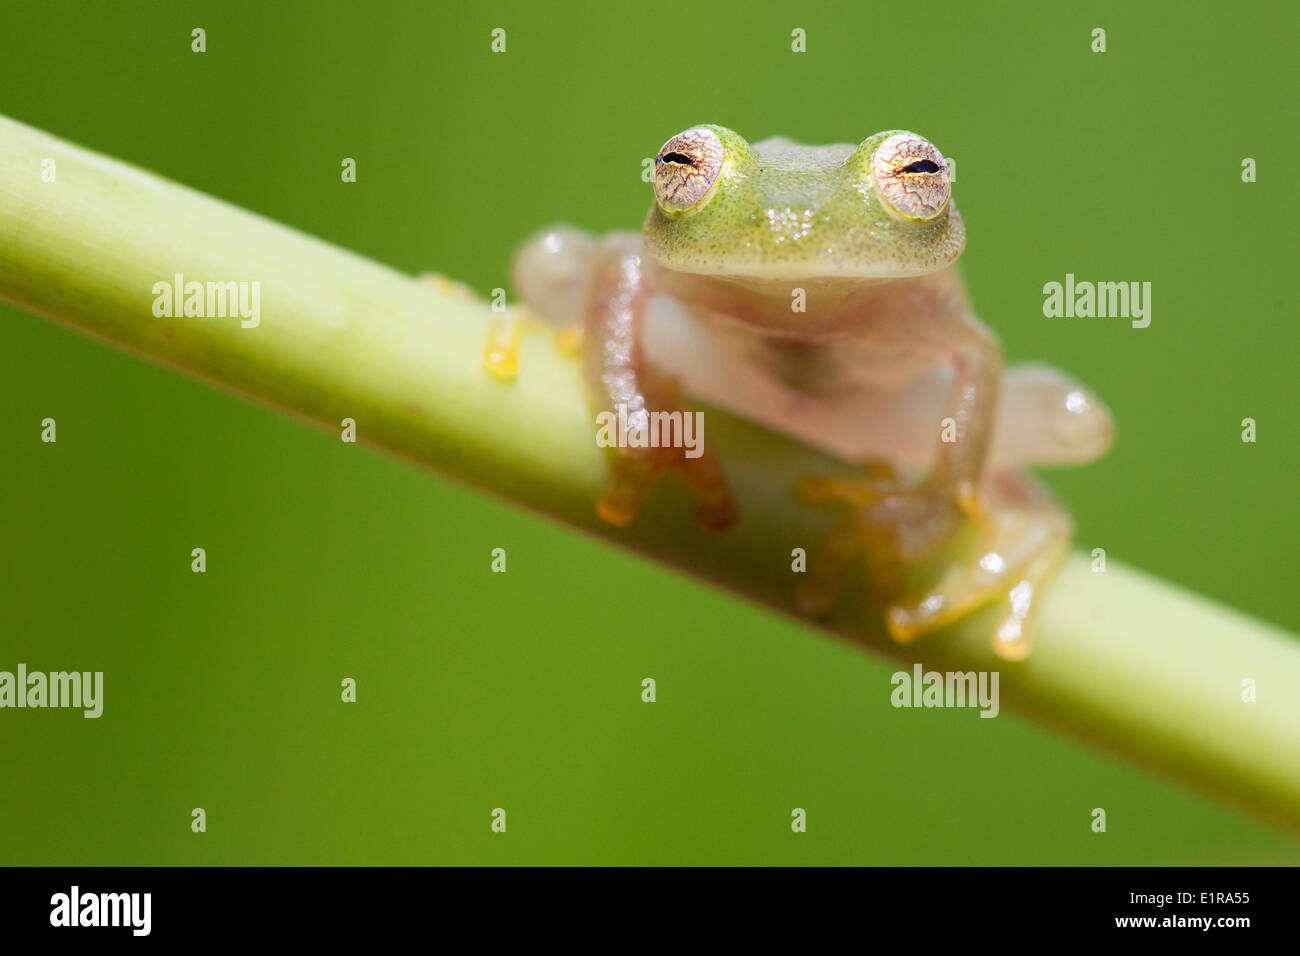 photo of a glass frog Stock Photo